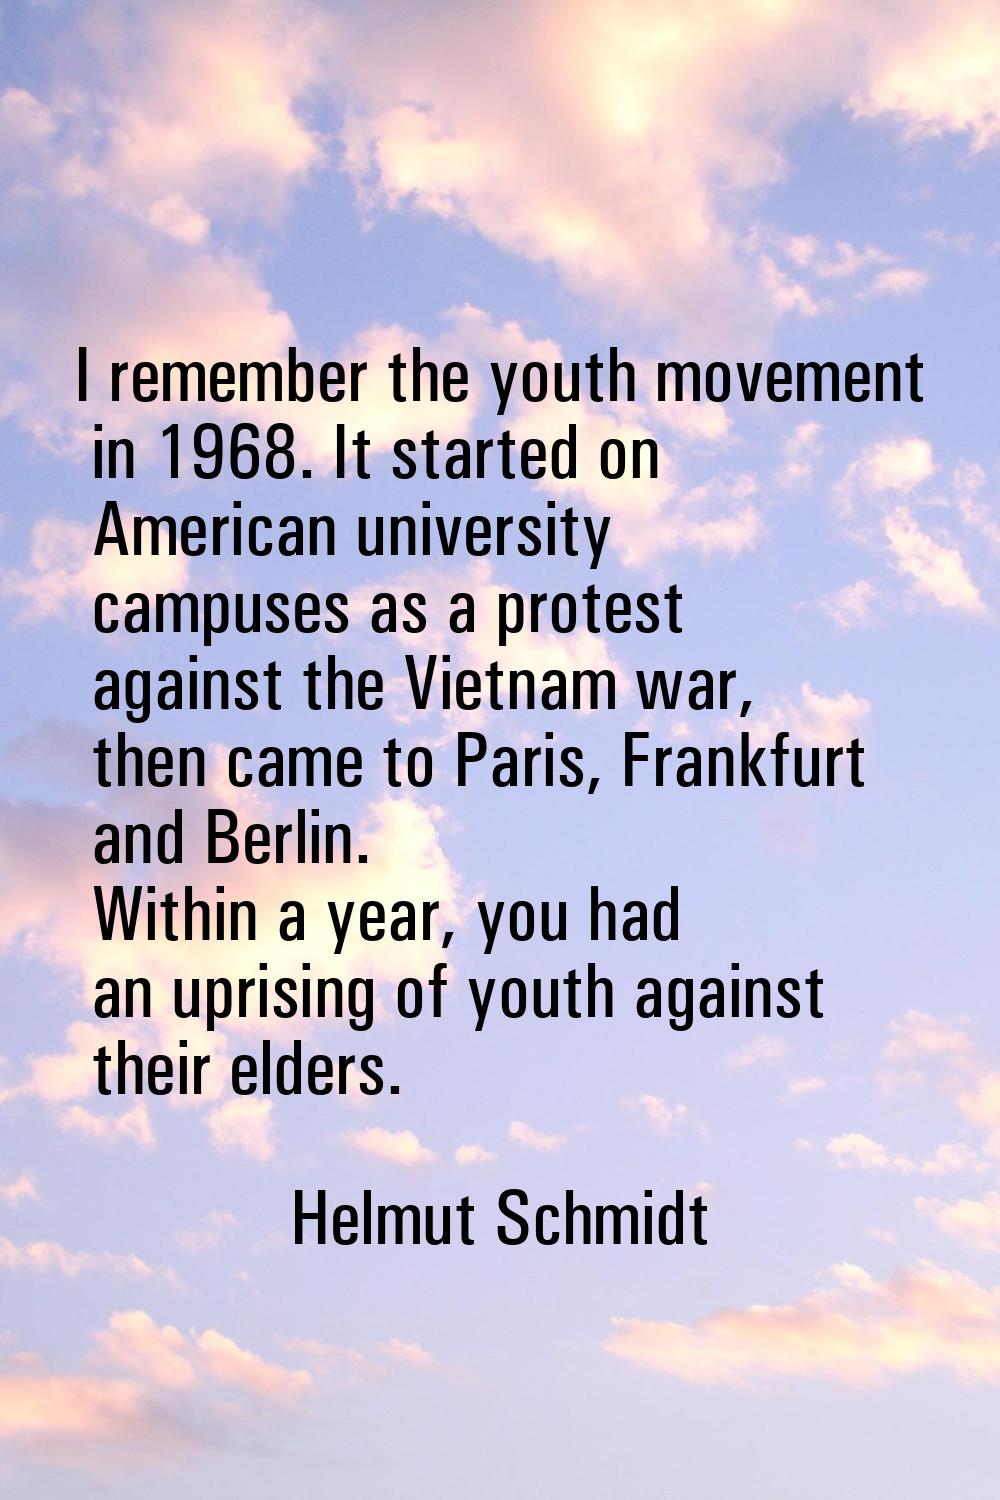 I remember the youth movement in 1968. It started on American university campuses as a protest agai